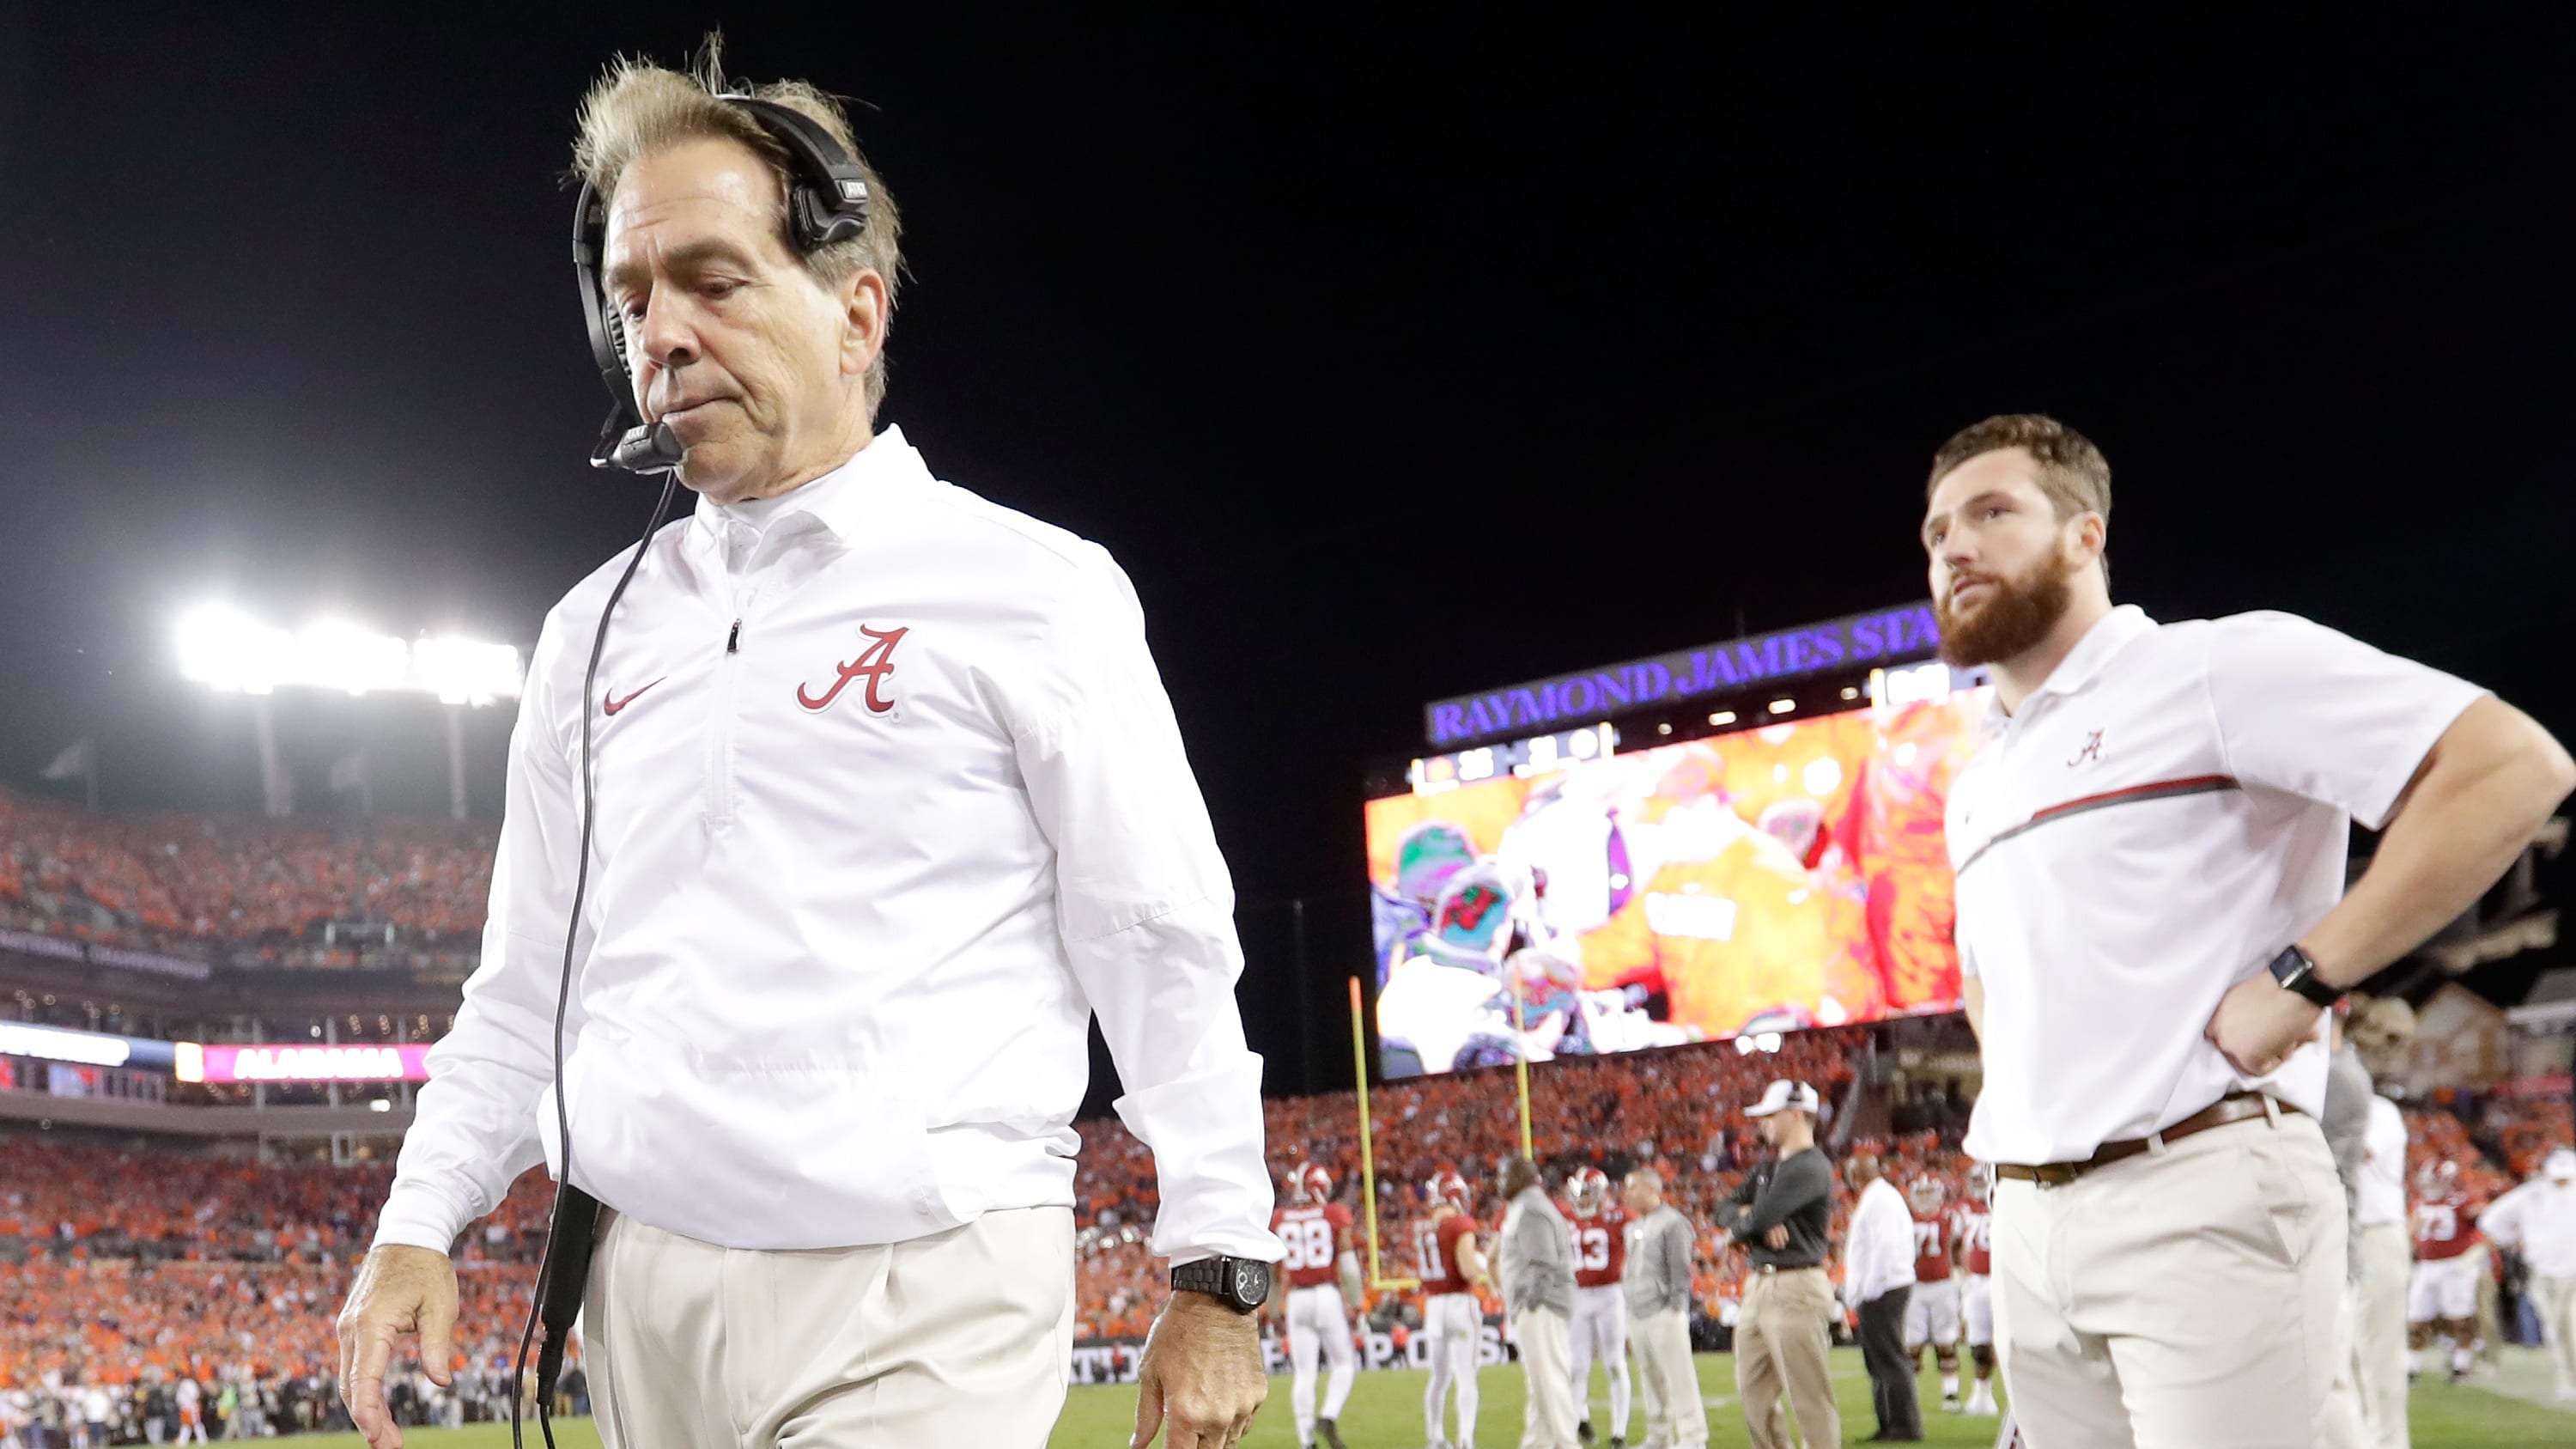 7 Head Coaches That Have Shockingly Gotten the Best of Nick Saban in Career Head-to-Head Record